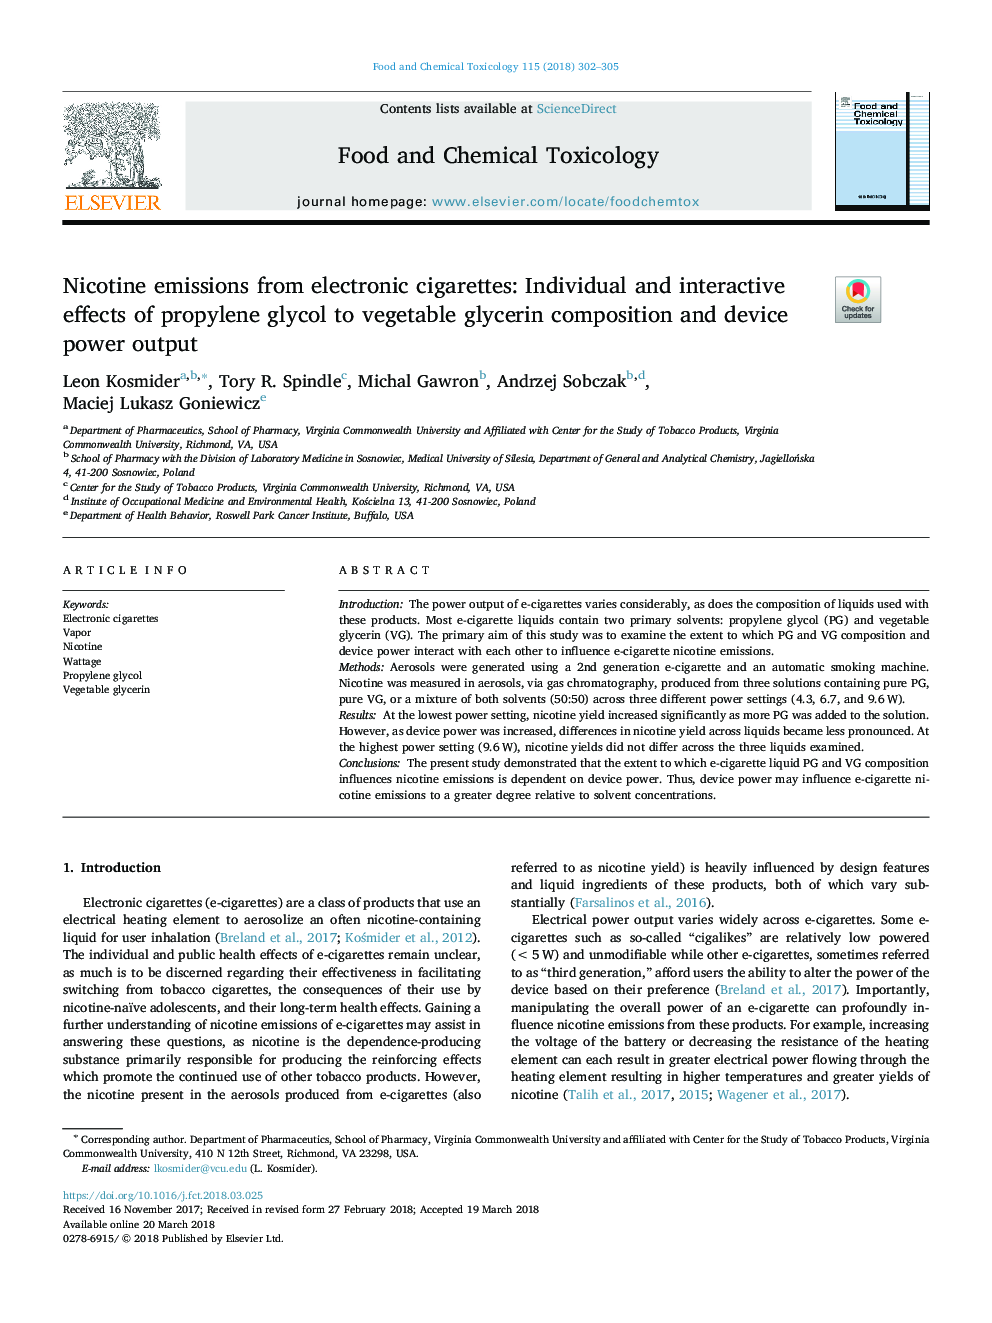 Nicotine emissions from electronic cigarettes: Individual and interactive effects of propylene glycol to vegetable glycerin composition and device power output